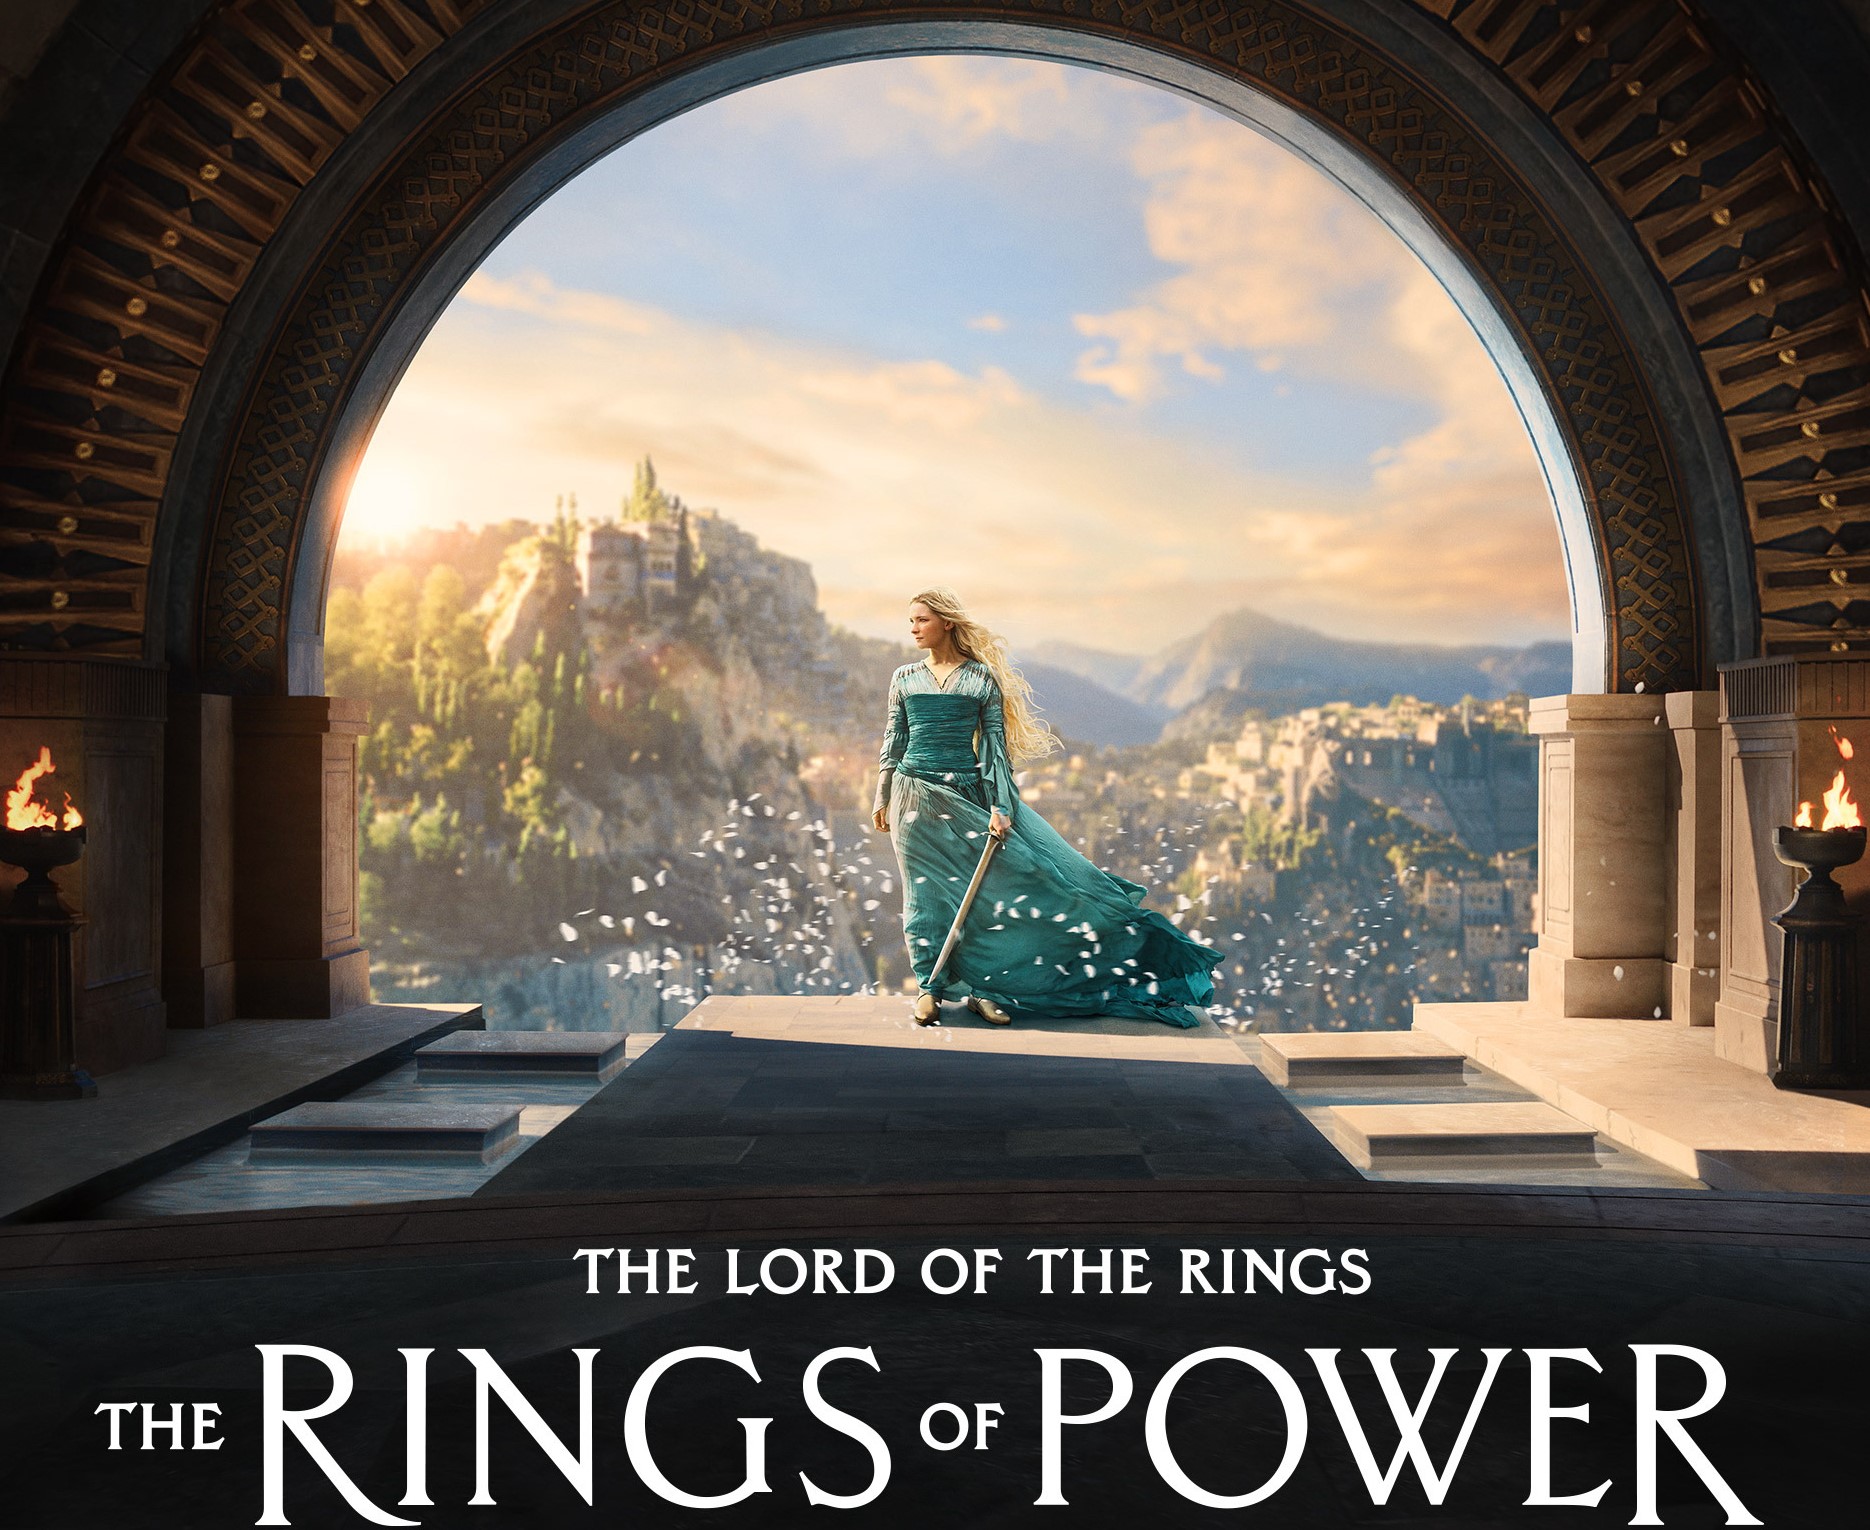 Rings of Power Casting Controversy Fans ask, was Tolkien racist